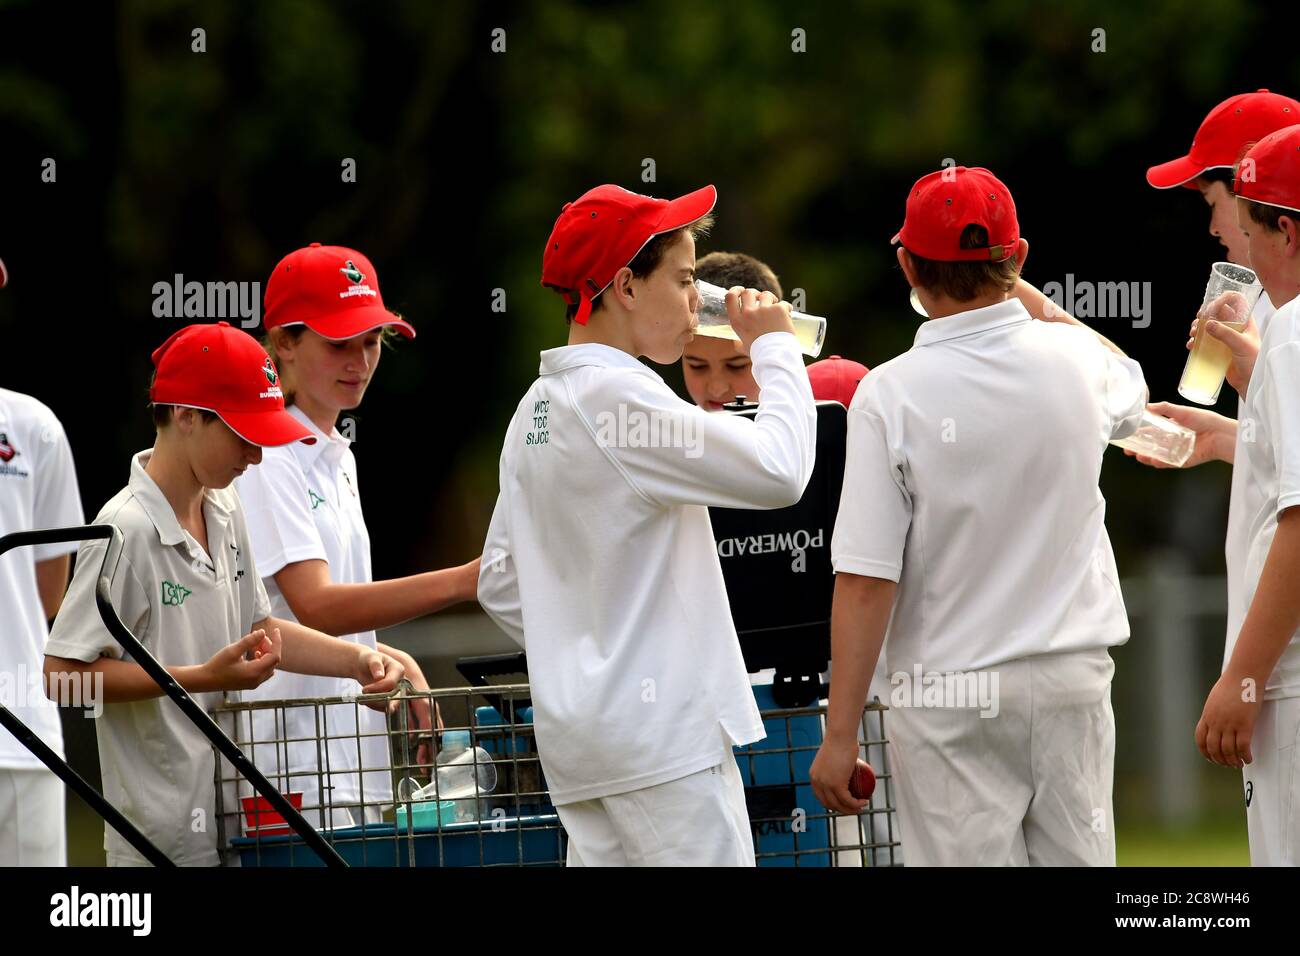 Young cricketers take a break and enjoy lemonade on a warm spring day in Victoria, Australia Stock Photo